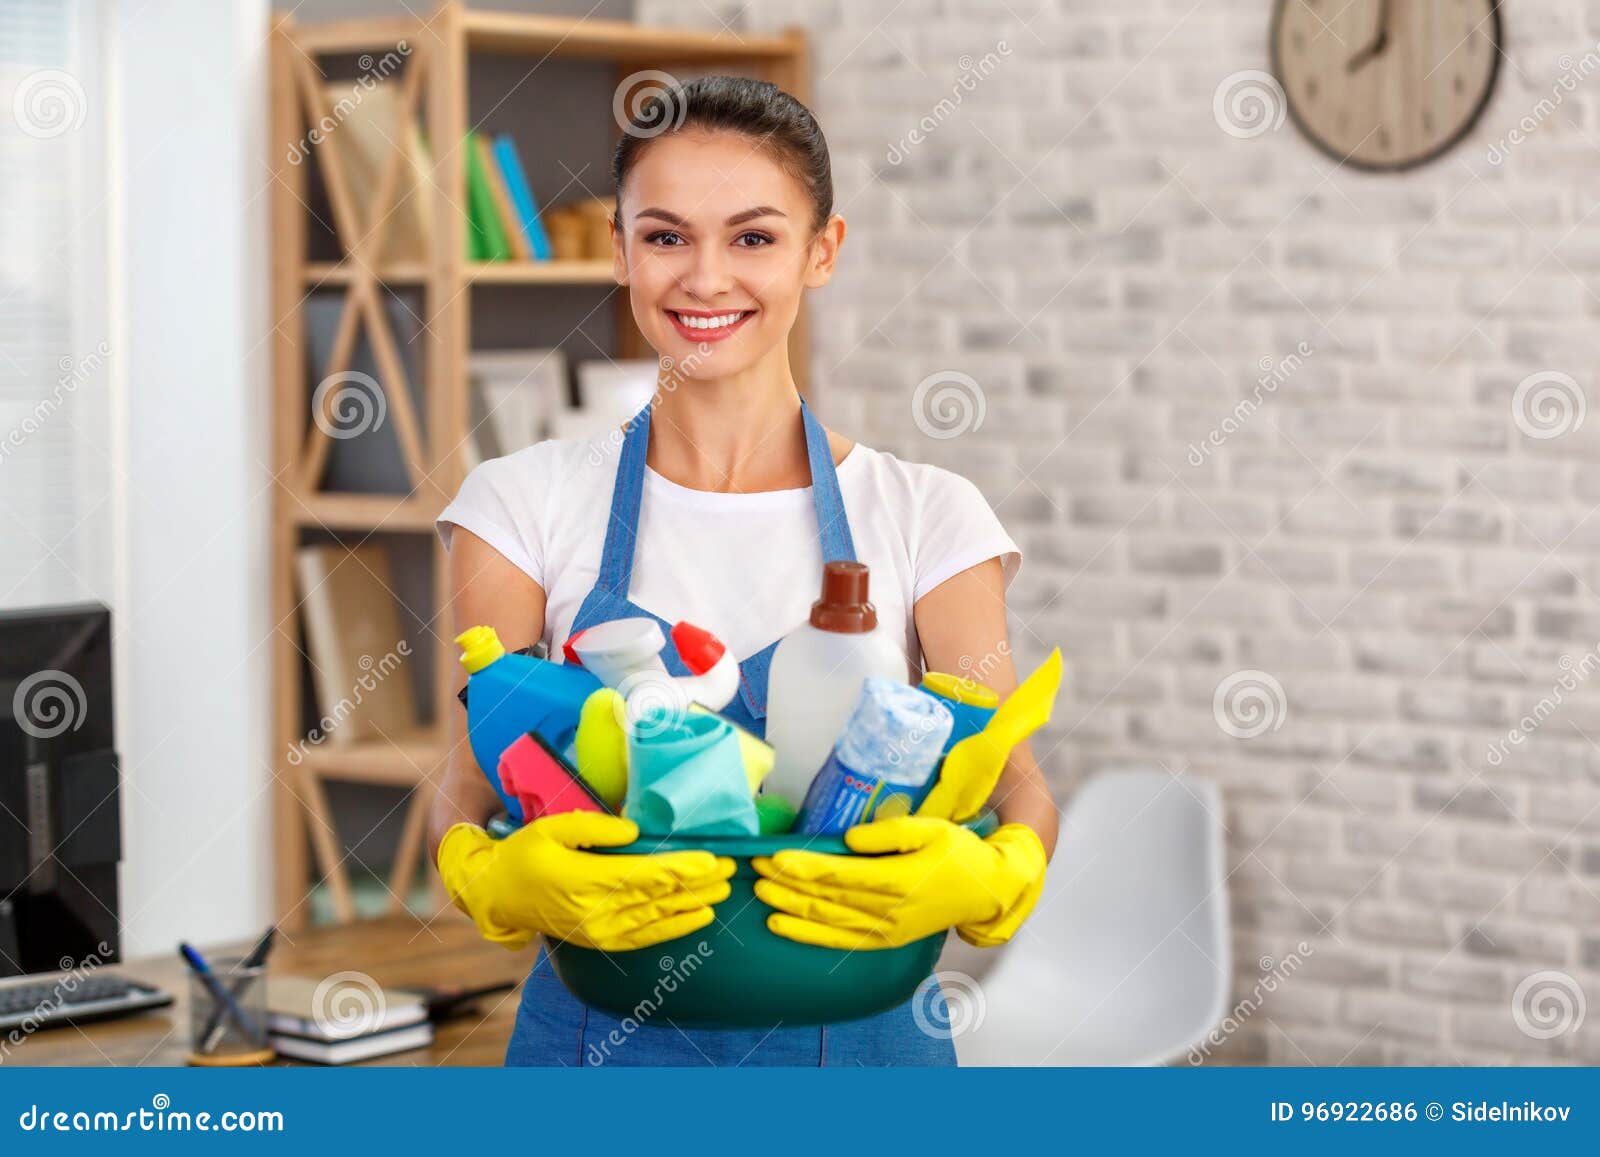 https://thumbs.dreamstime.com/z/concept-home-cleaning-services-studio-shot-housekeeper-beautiful-woman-office-woman-wearing-gloves-smiling-holding-bowl-96922686.jpg